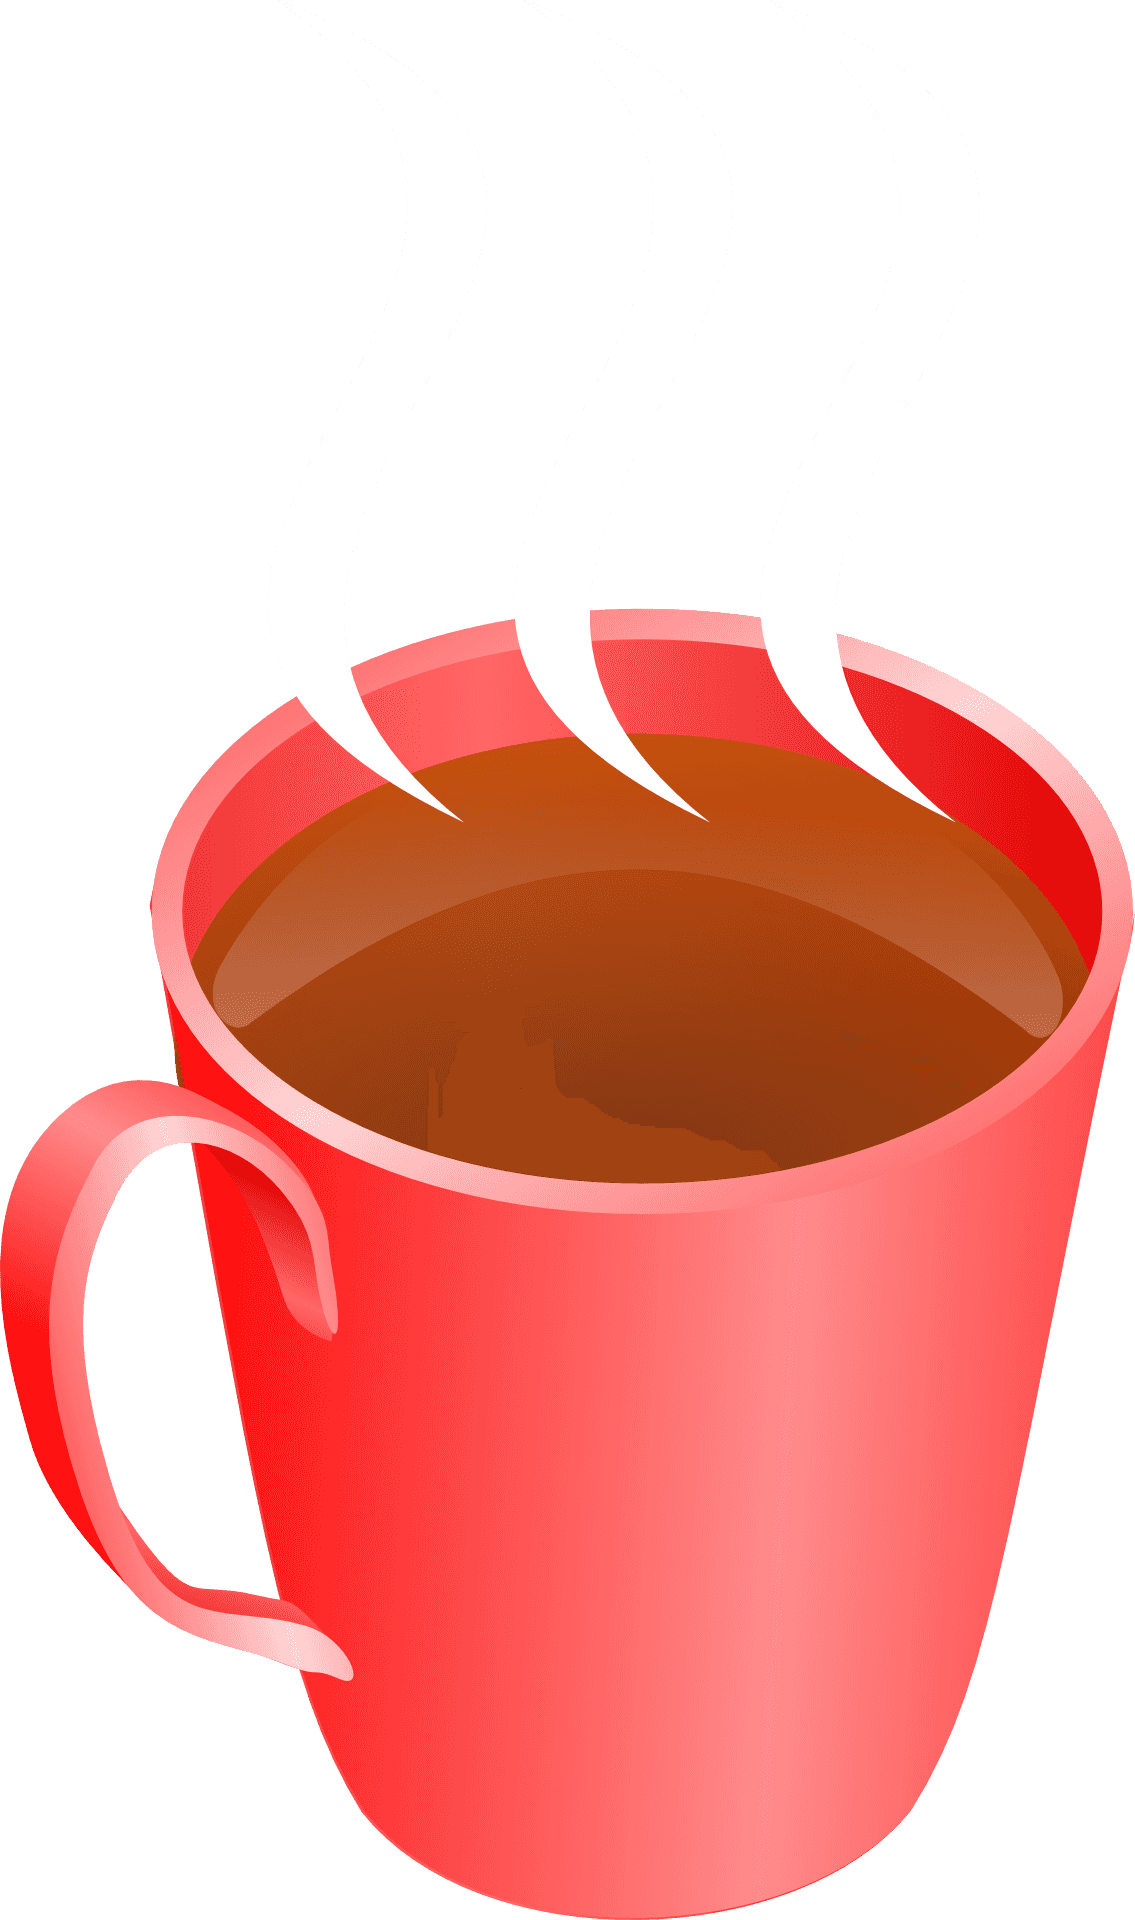 Steaming Red Tea Cup Vector PNG image